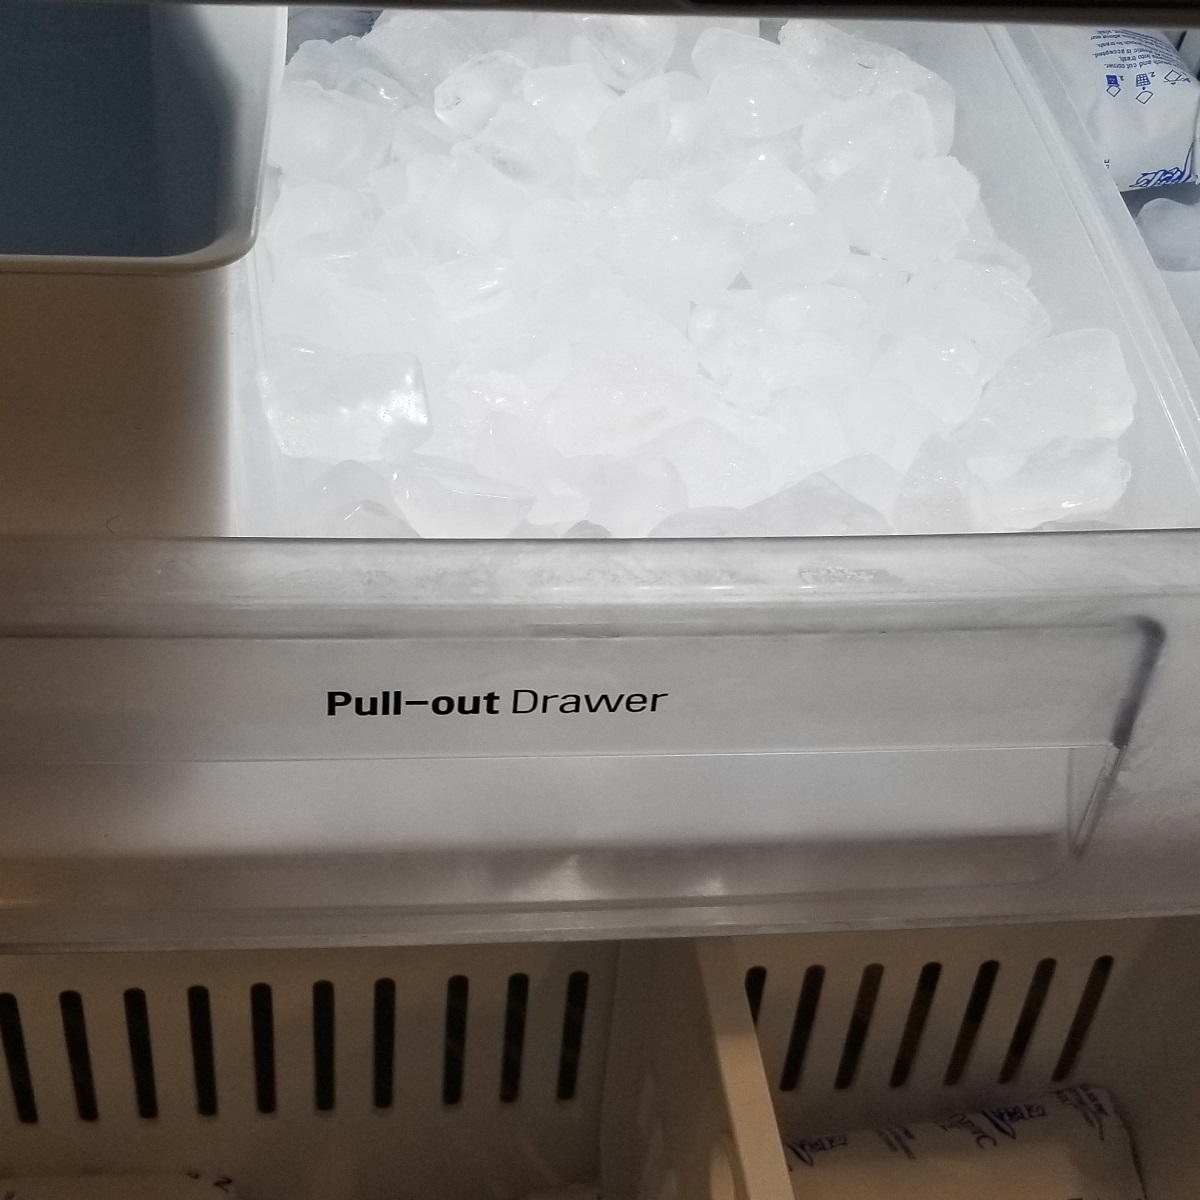 How To Winterize A Fridge With Ice Maker